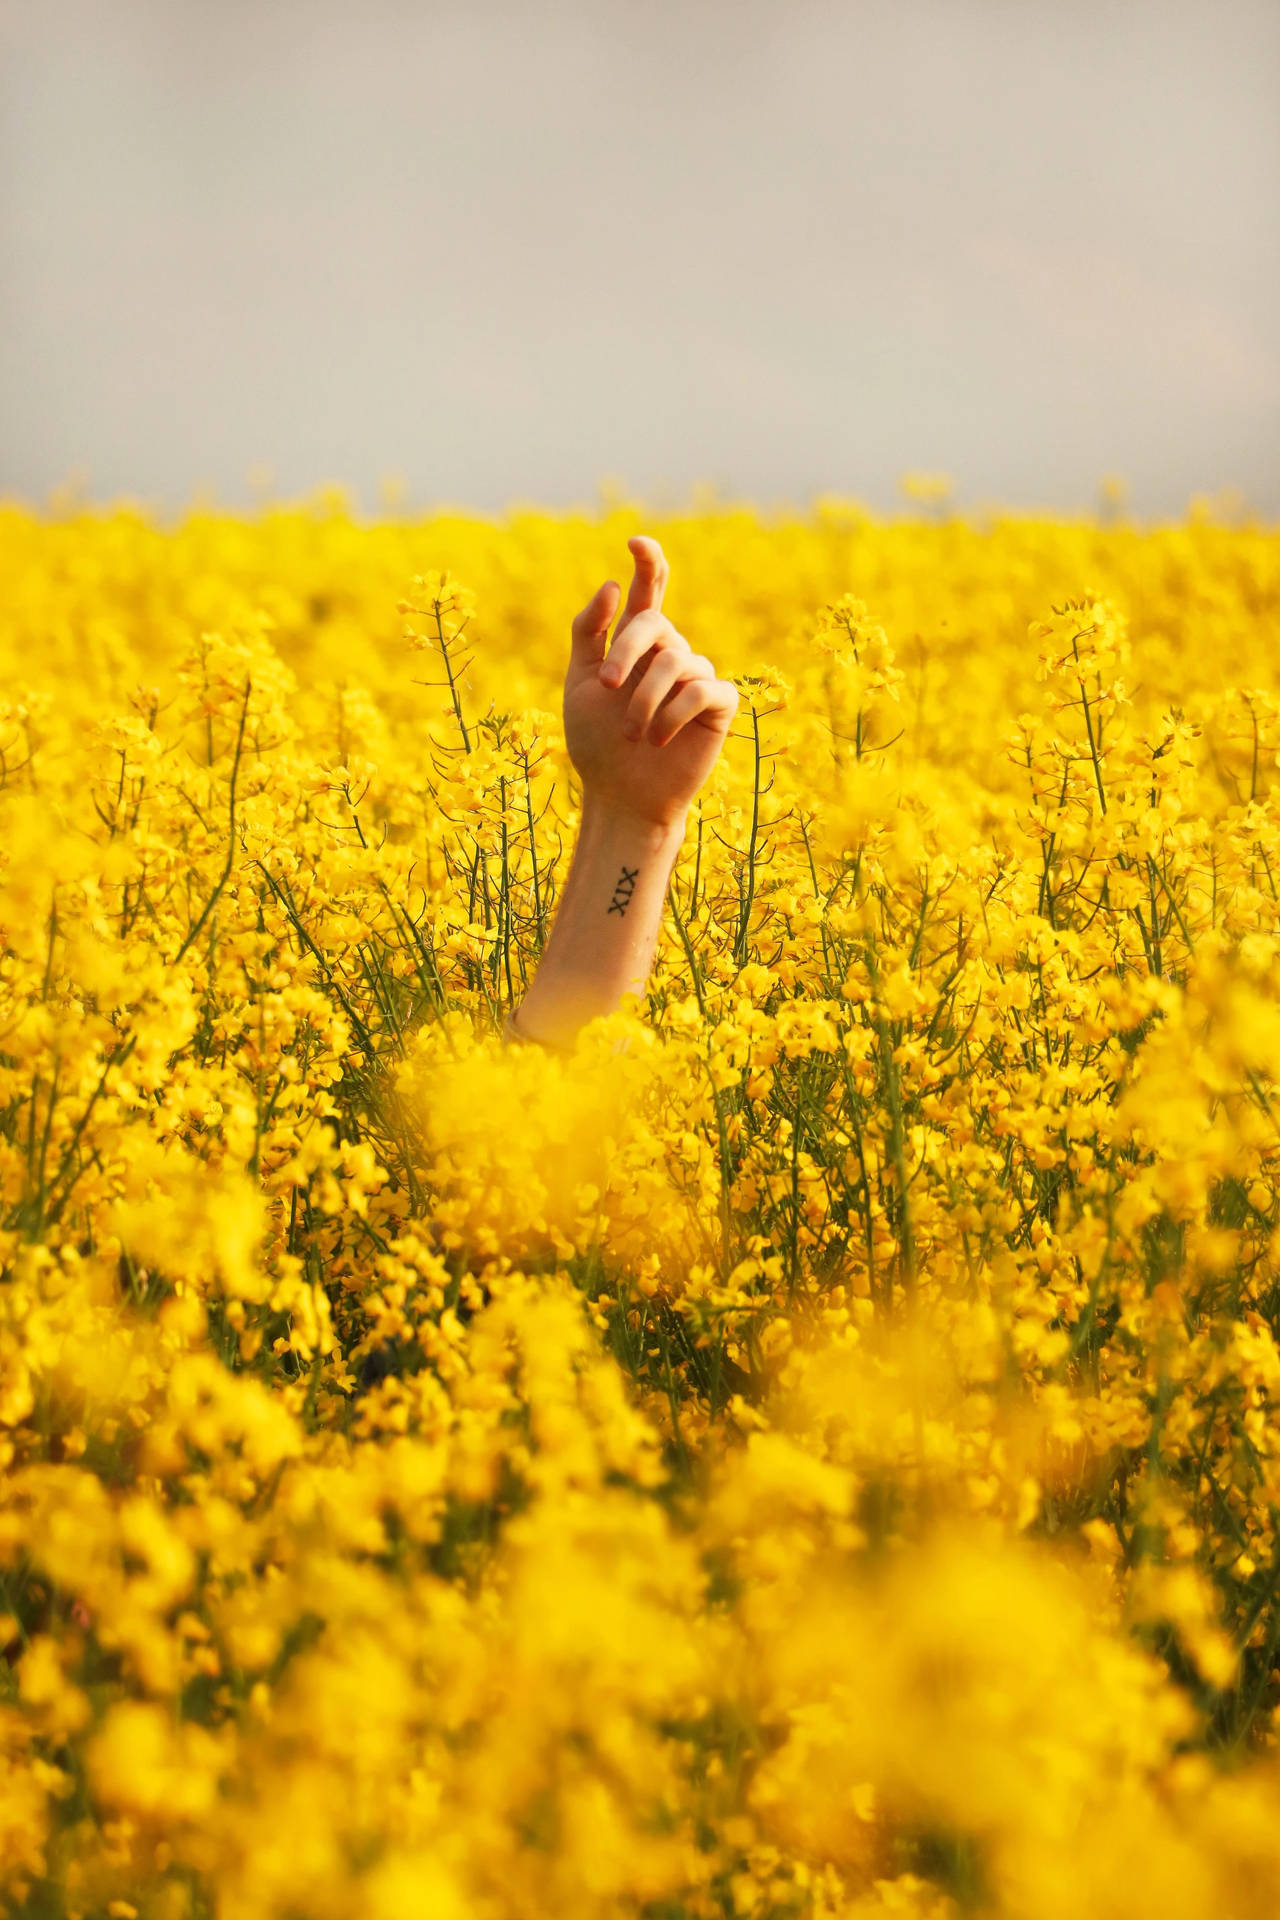 Hand In Flowers Yellow Hd Iphone Wallpaper